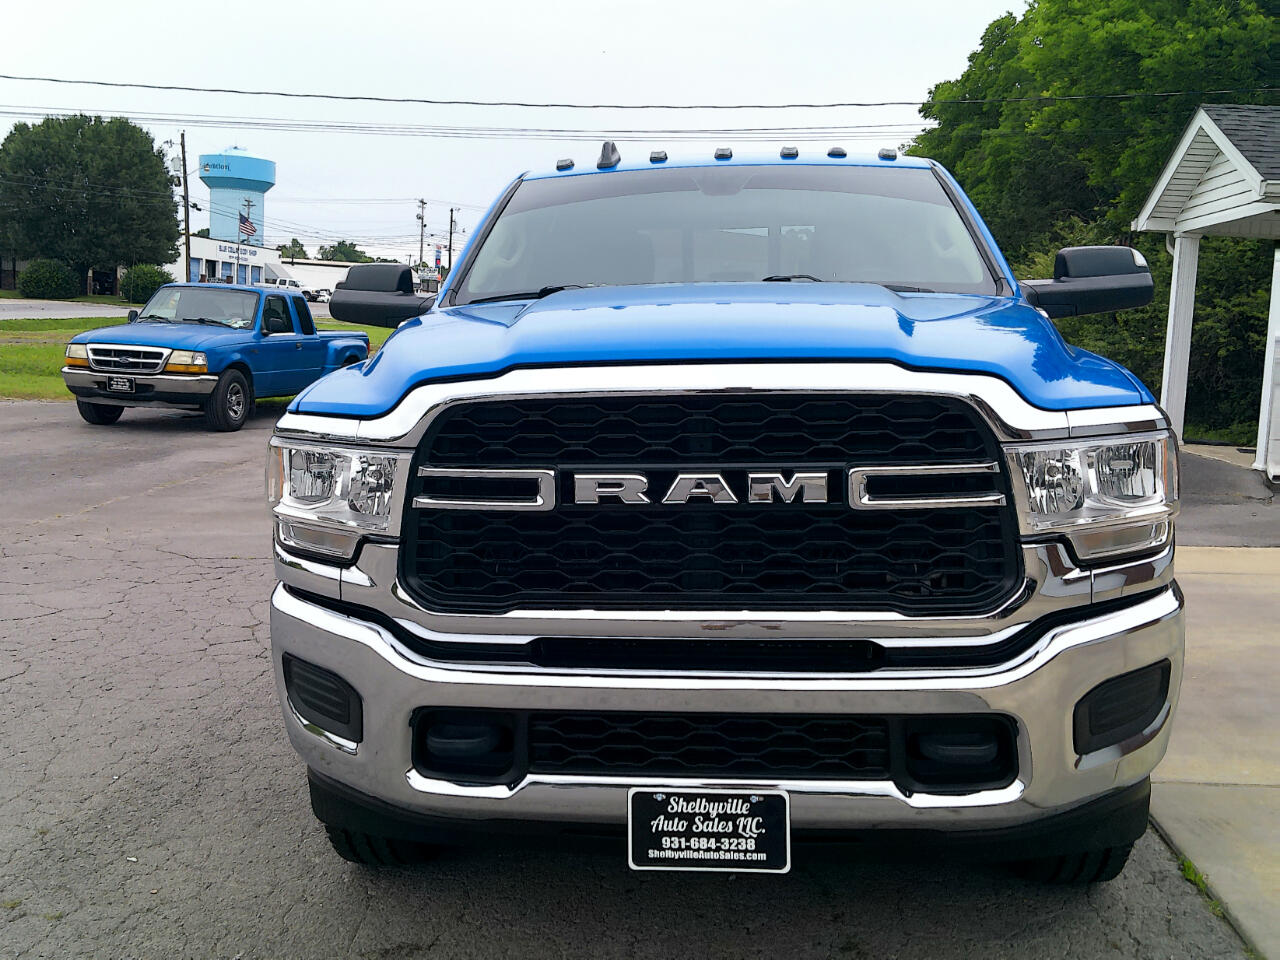 2020 RAM 2500 CHECK IT OUT 4WDSTEP BARSBACK UP CAMERALIKE NEW TIRESEXHAUST BRAKEGO